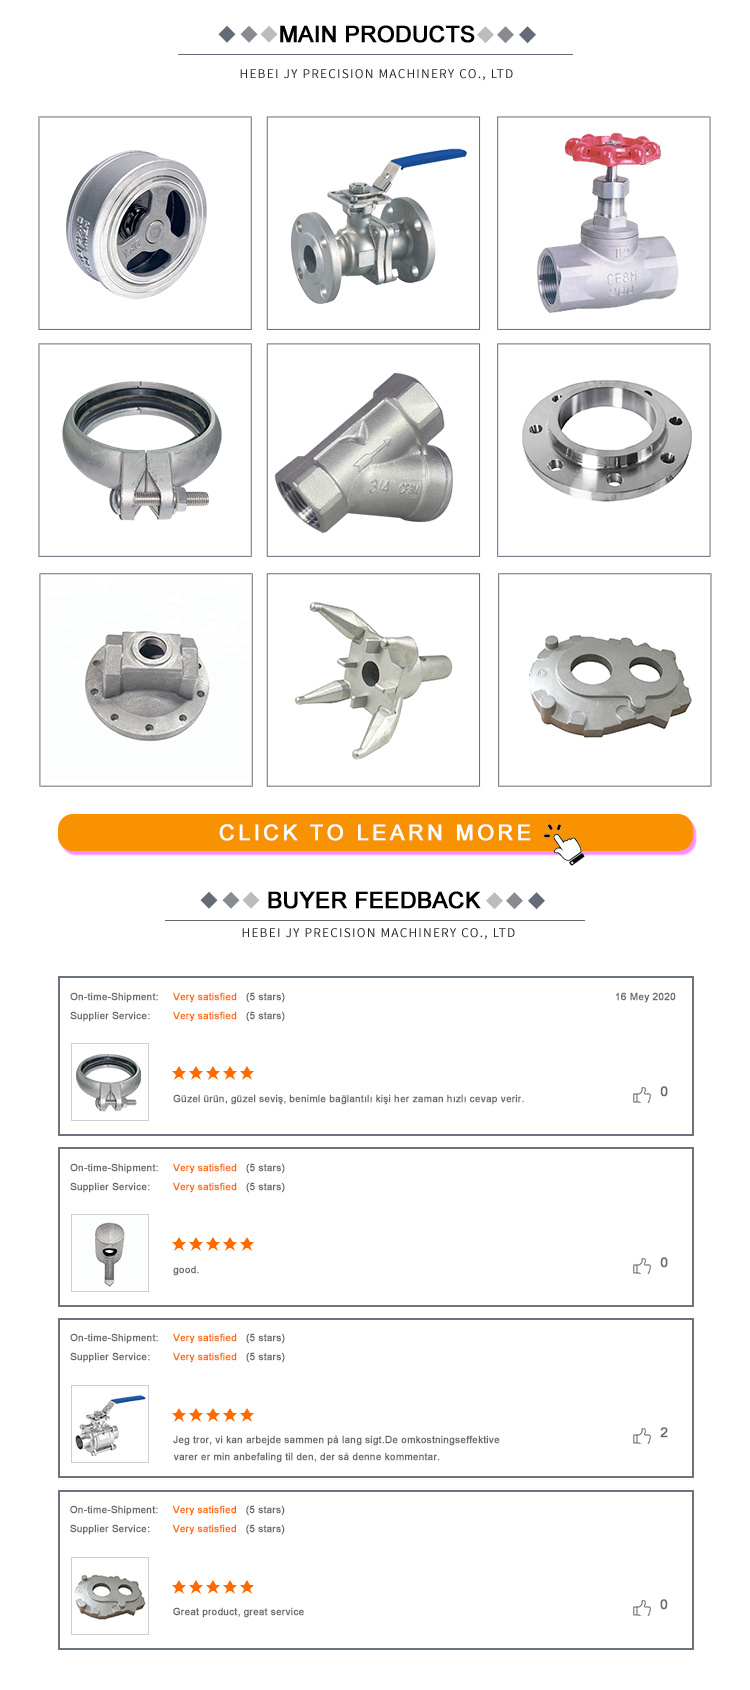 High Quality Factory Direct Stainless Steel Investment Casting Process Products Hooking Parts Lost Wax Casting